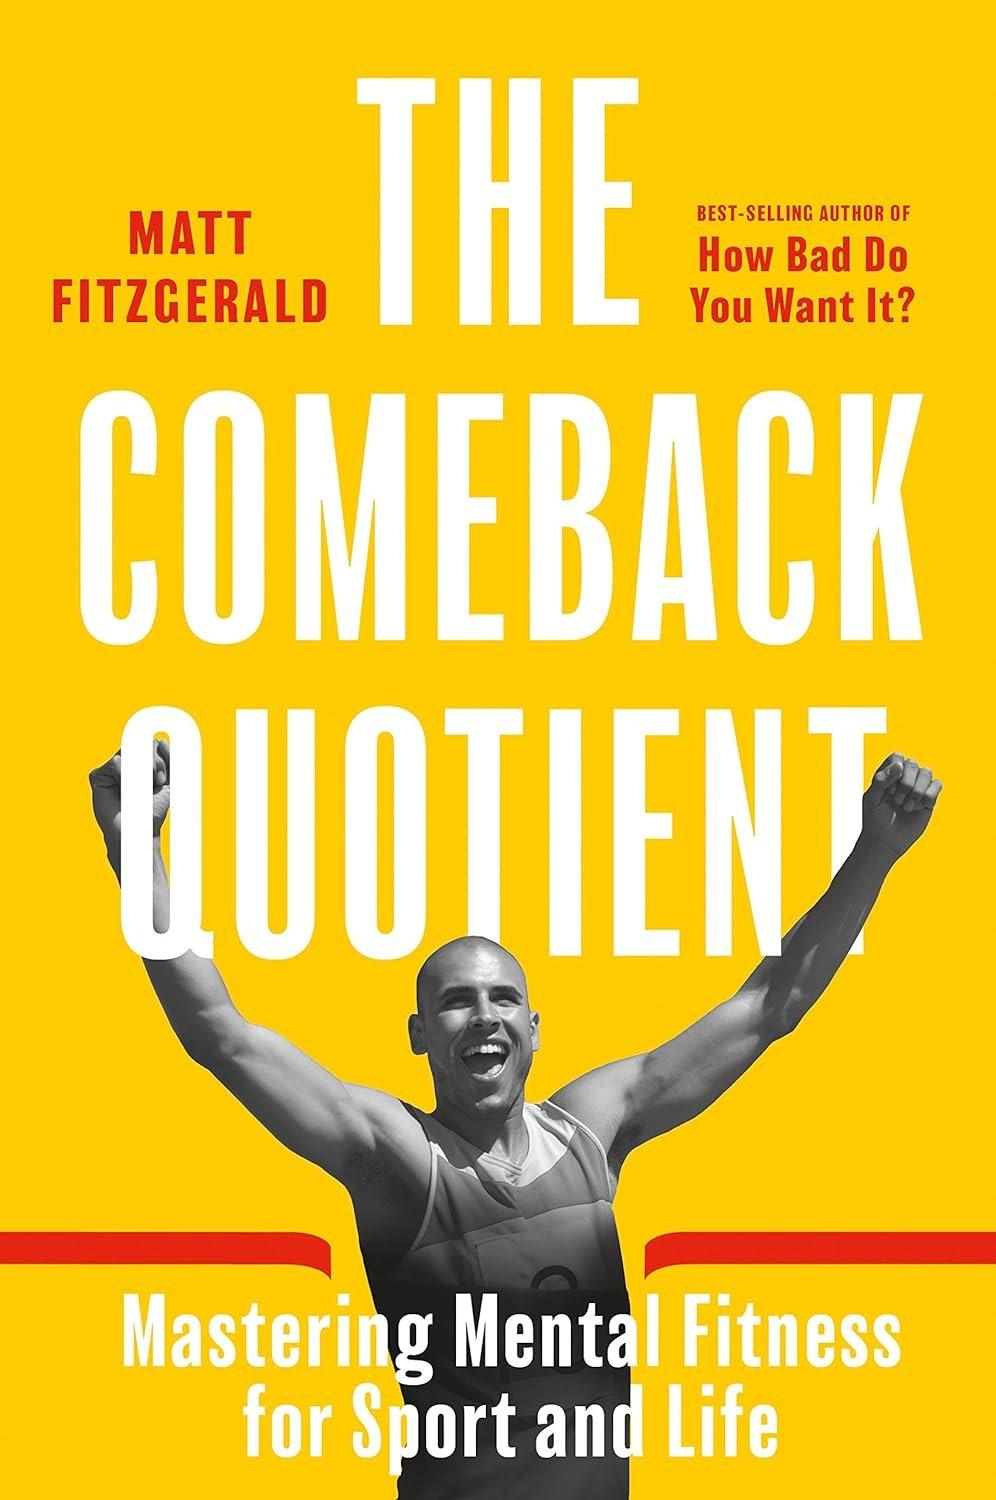 Cover of the book "The Comeback Quotient: Mastering Mental Fitness for Sport and Life" by Matt Fitzgerald showing an ultrarealist image of an exuberant man with arms raised in victory. The background is bright yellow with prominent.